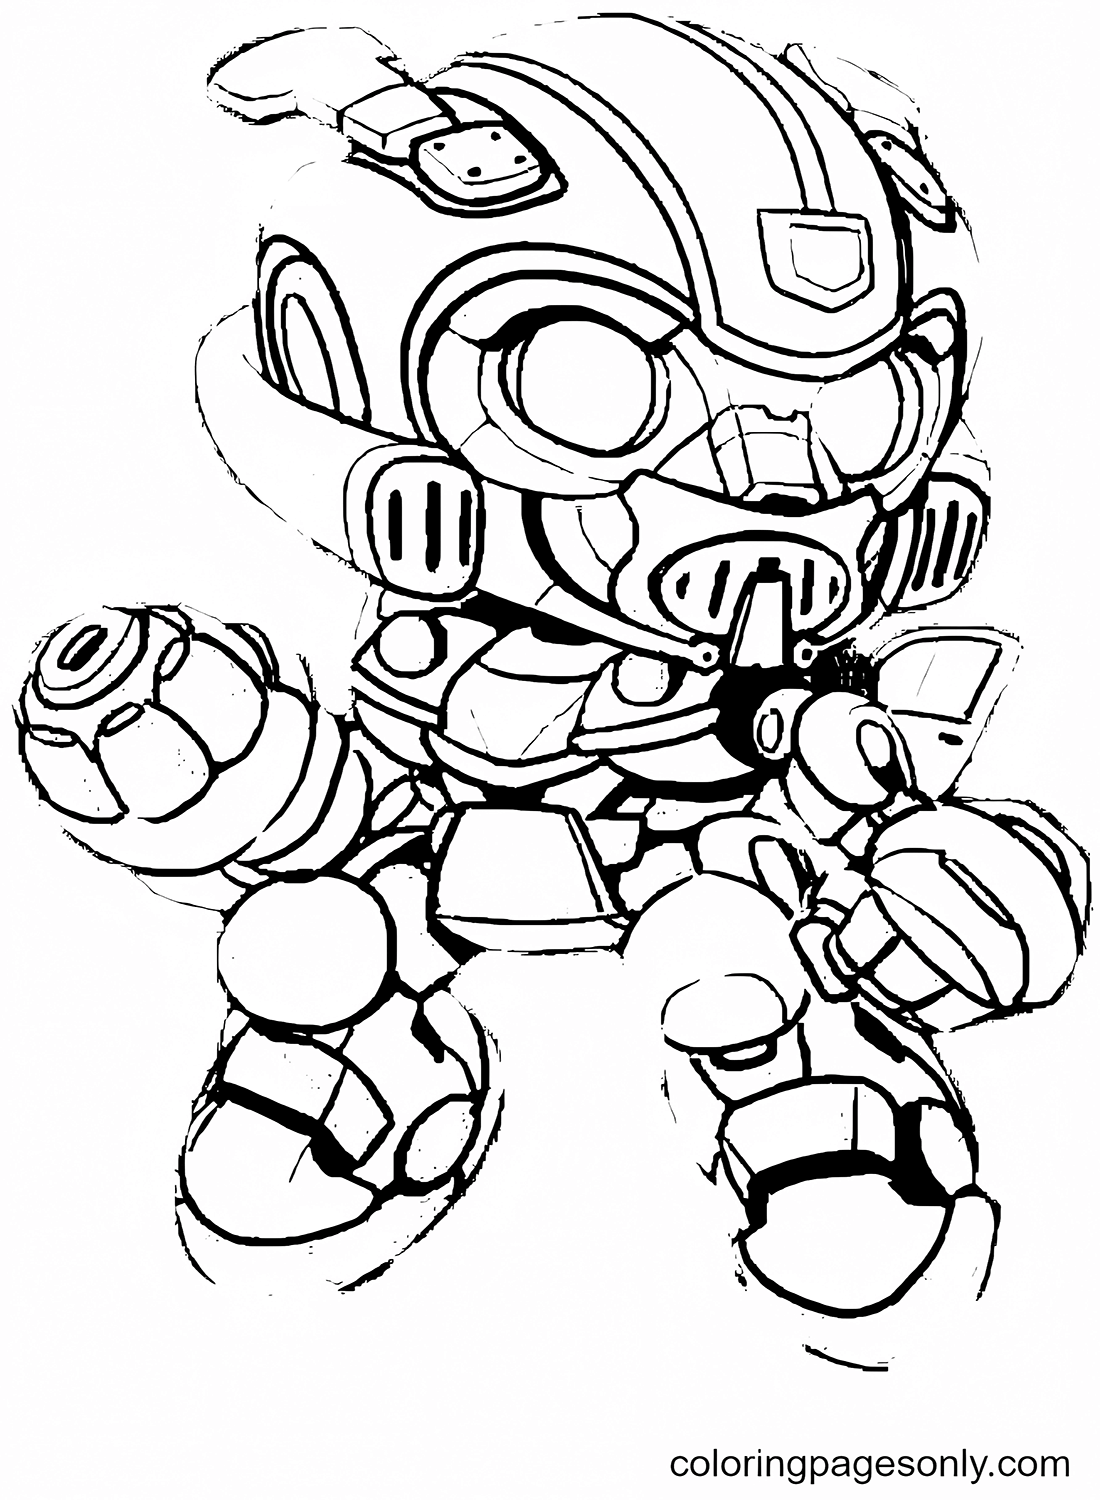 Chibi Cute Bumblebee Coloring Pages